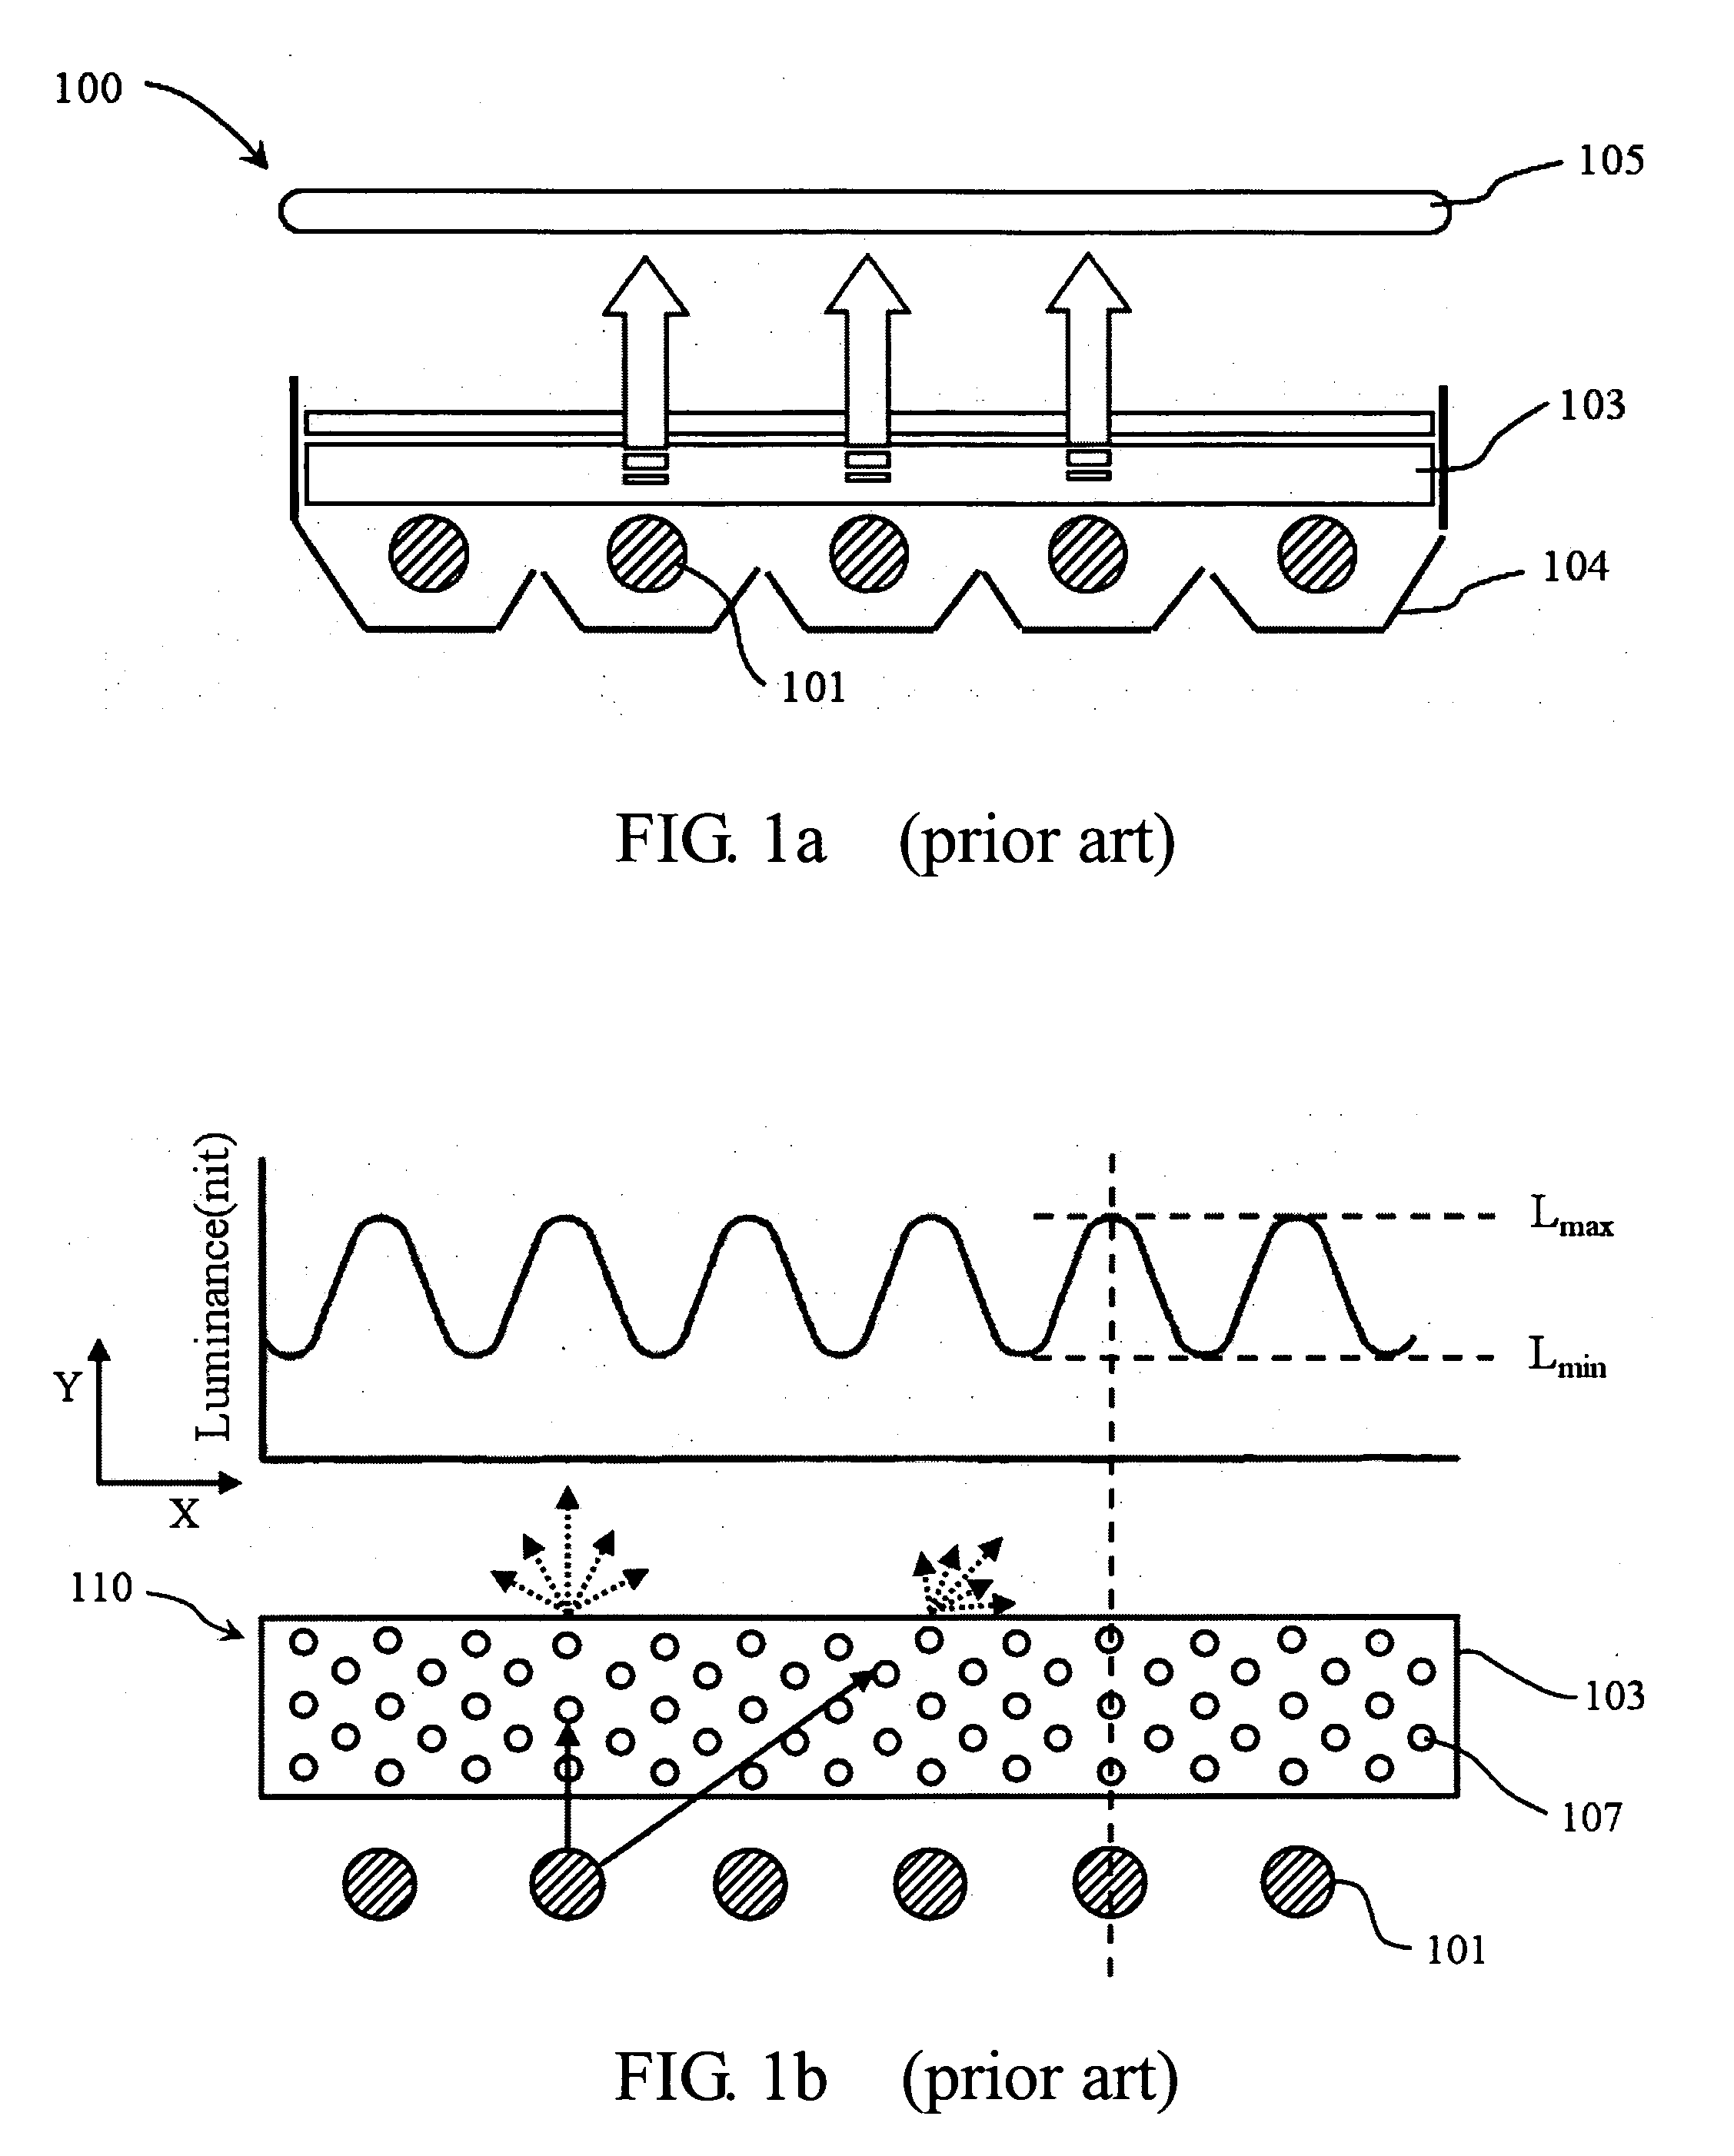 Method of forming light-scattering dots inside the diffusion plate and light guide plate by laser engraving